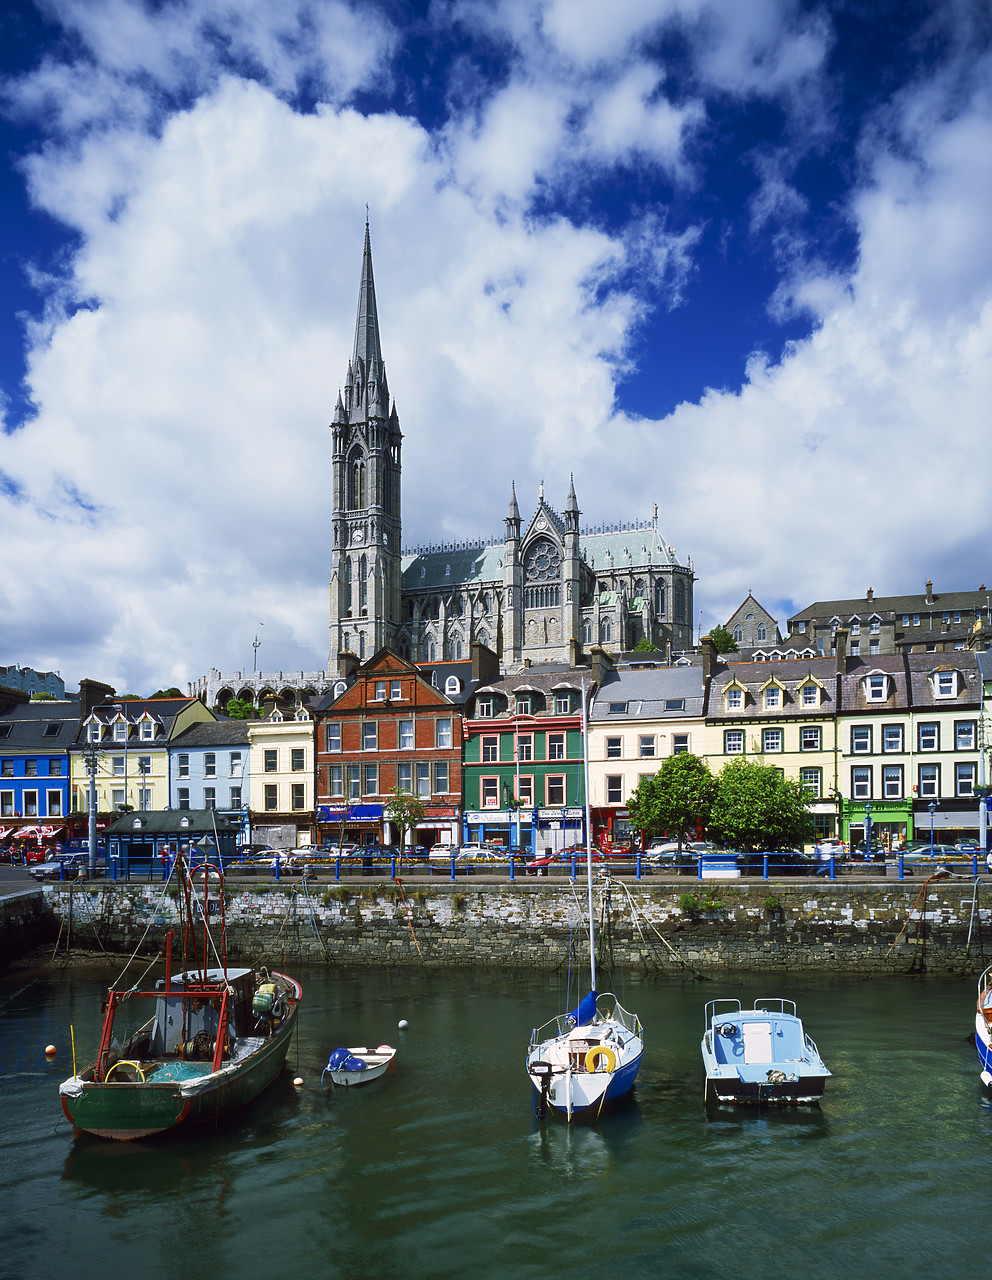 #030073-8 - Fishing Boats & Colourful Buildings, Cobh, Co. Cork, Ireland